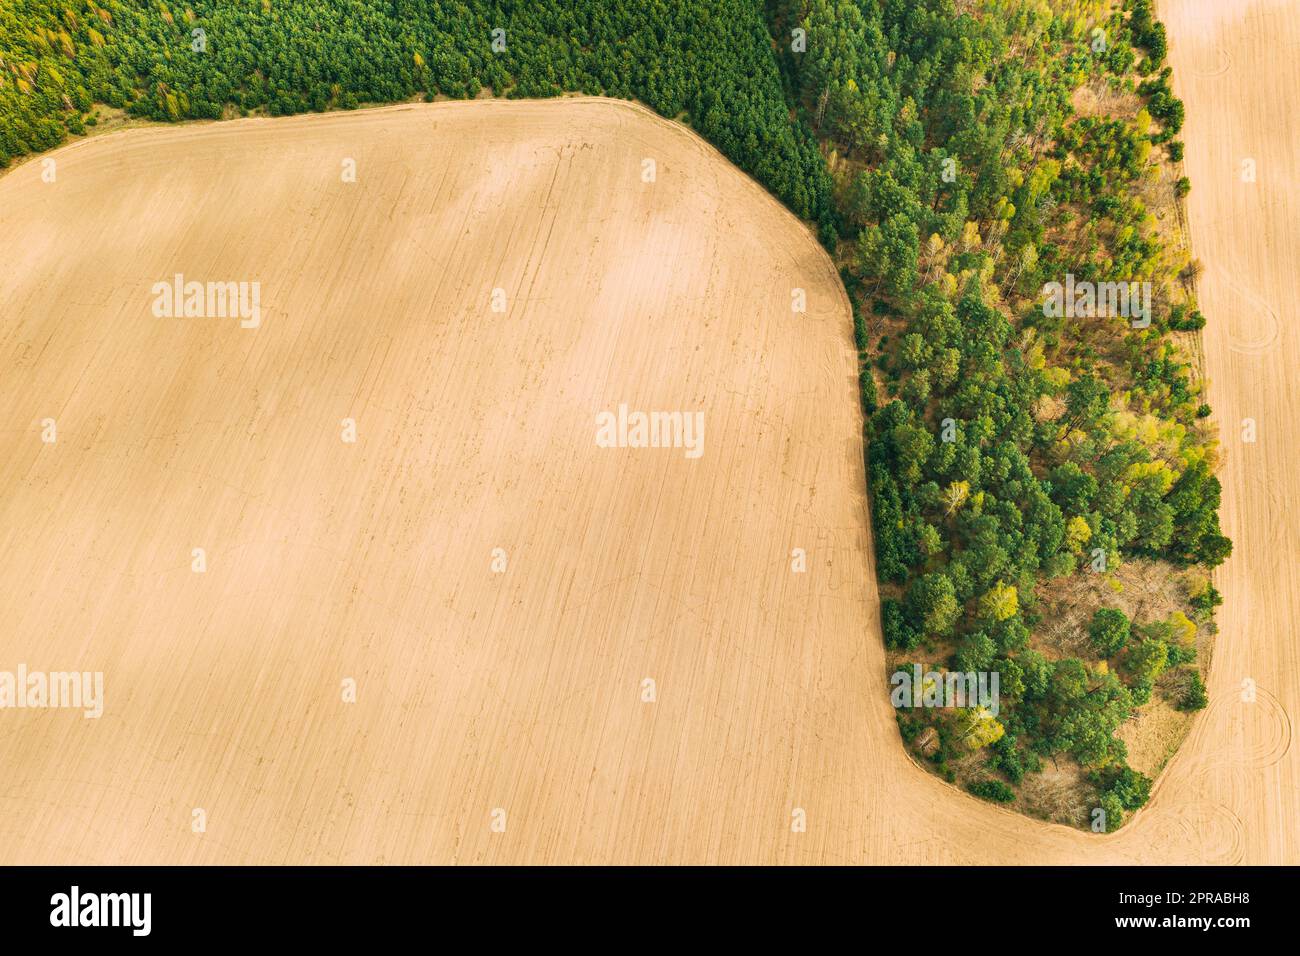 Aerial Top View Of Agricultural Landscape With Growing Forest Trees On Border With Field. Beautiful Rural Landscape In Bird's-eye View. Spring Field With Empty Soil Stock Photo